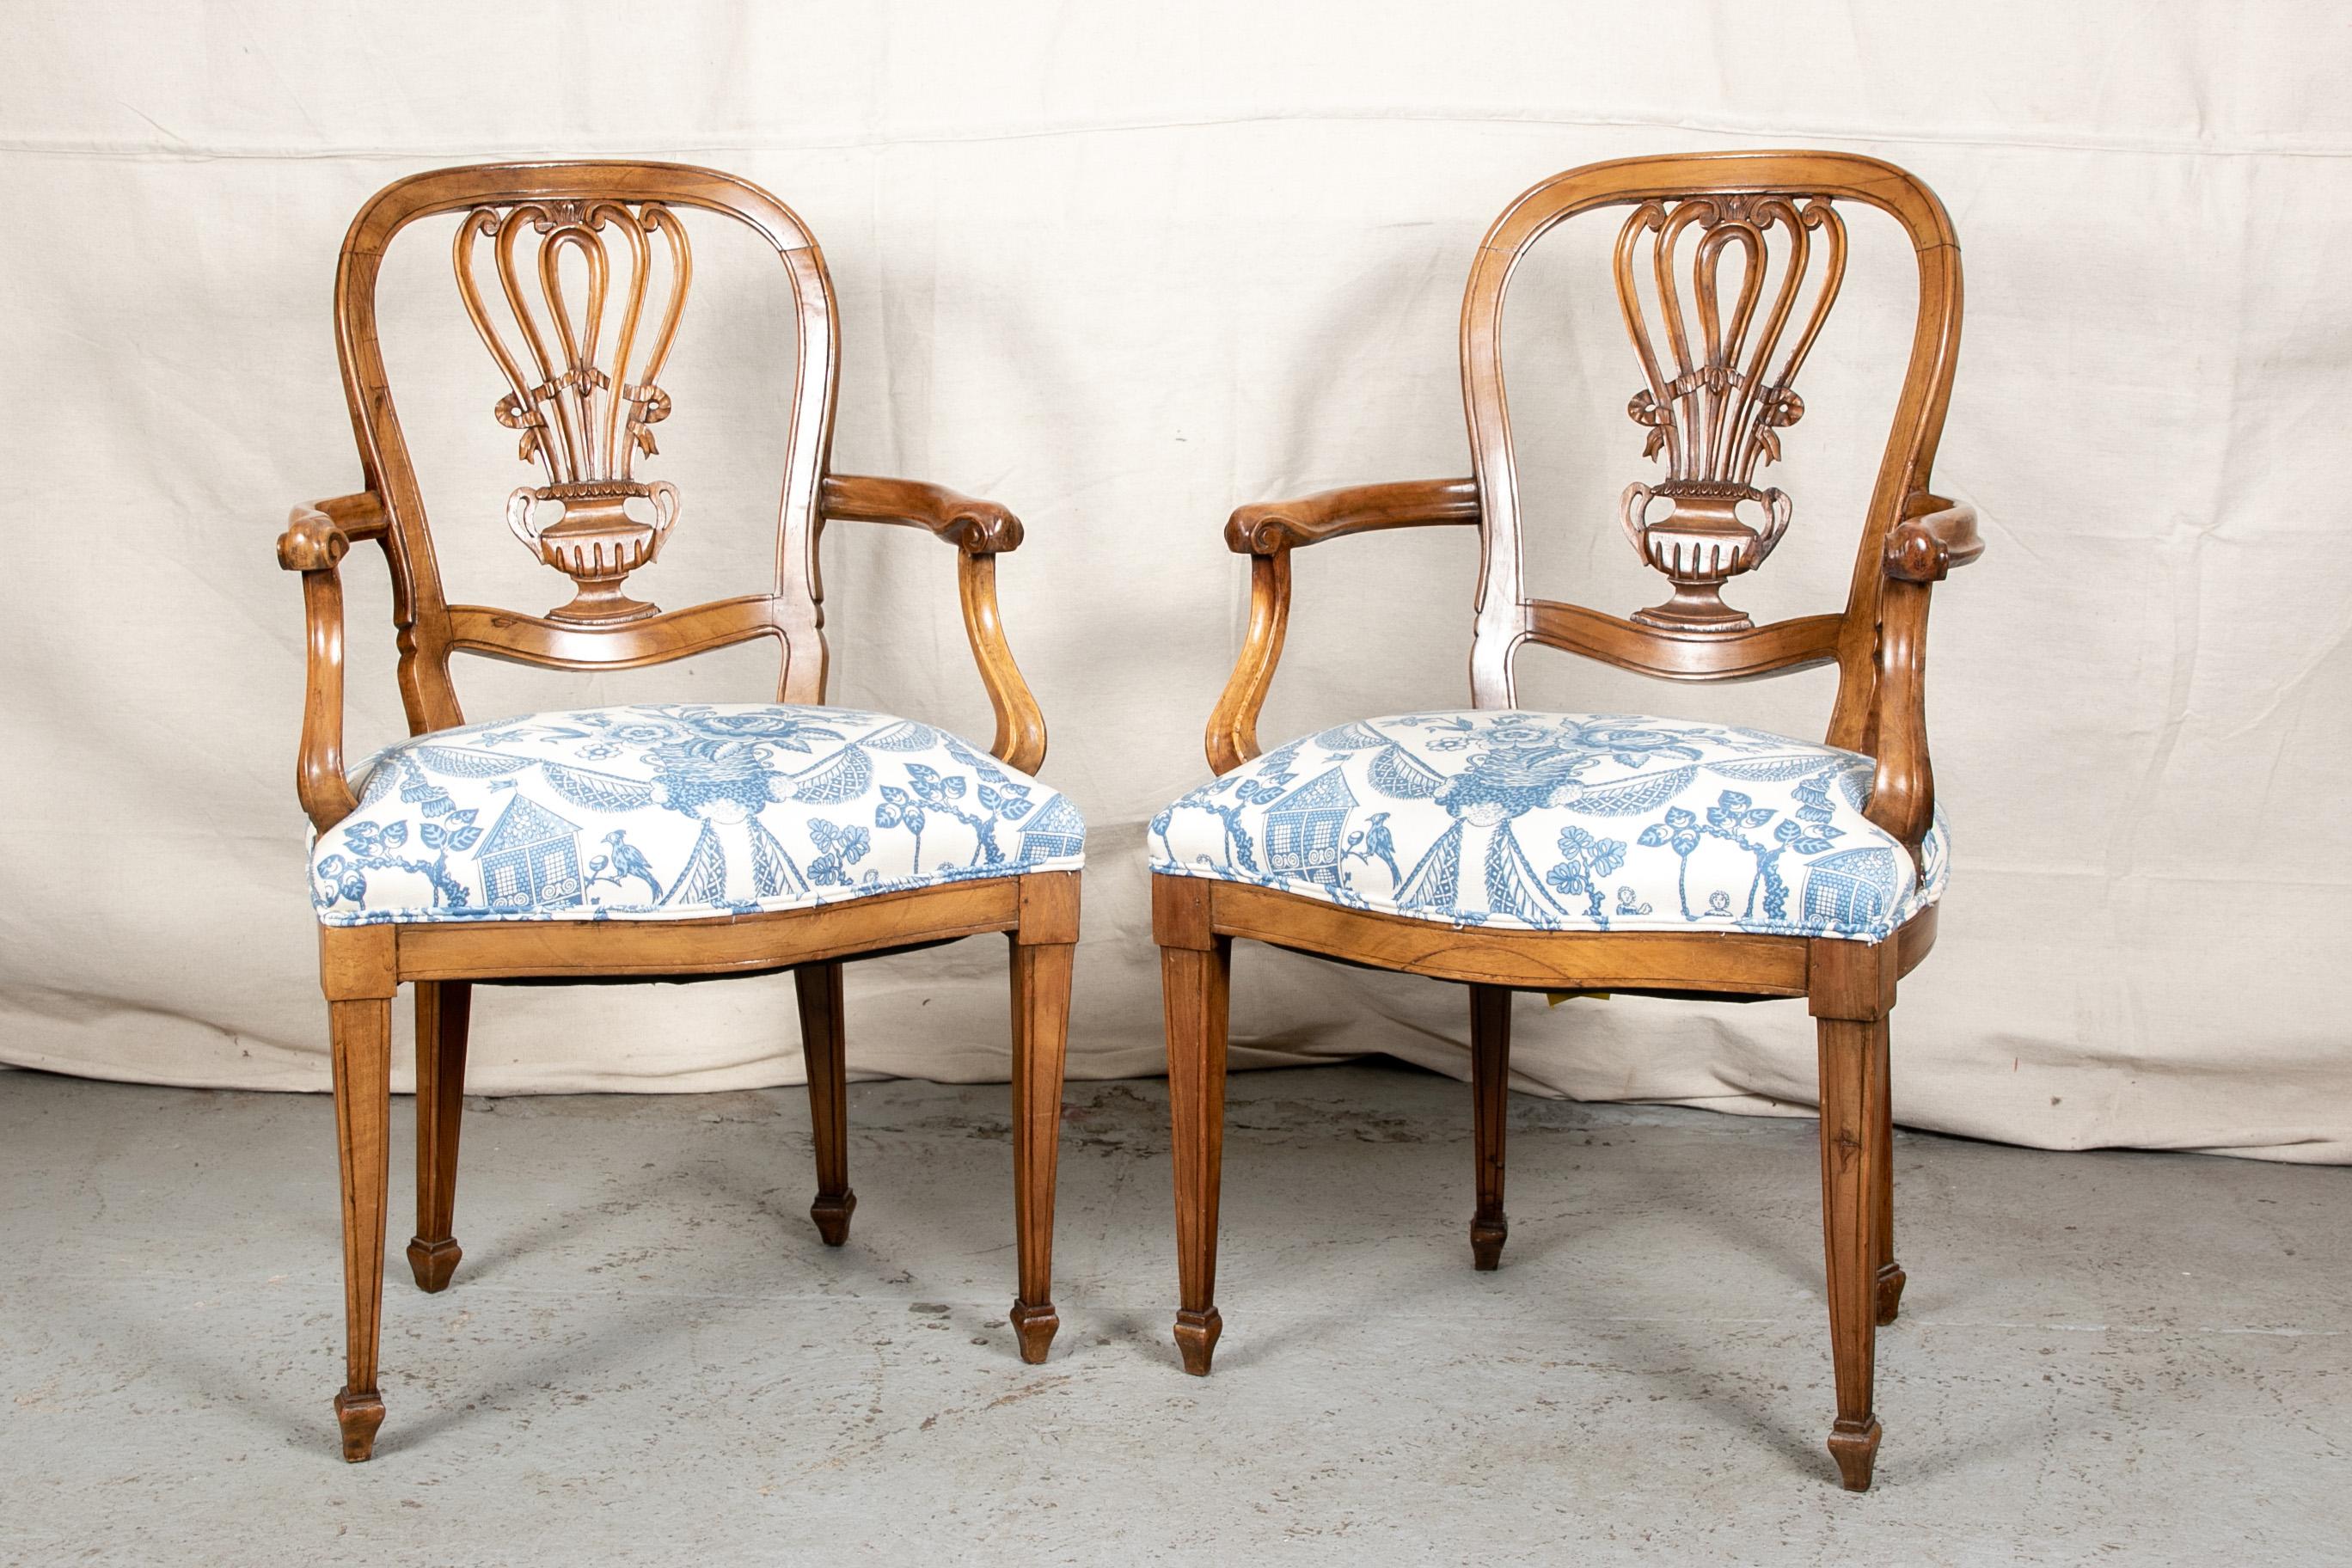 Pair of carved fruitwood armchairs, elaborate openwork scrolled floral urn splats with ribbon details. Curved arms with scrolled ends, raised on square tapering legs with spade feet. The shaped seats upholstered in a blue and white print.